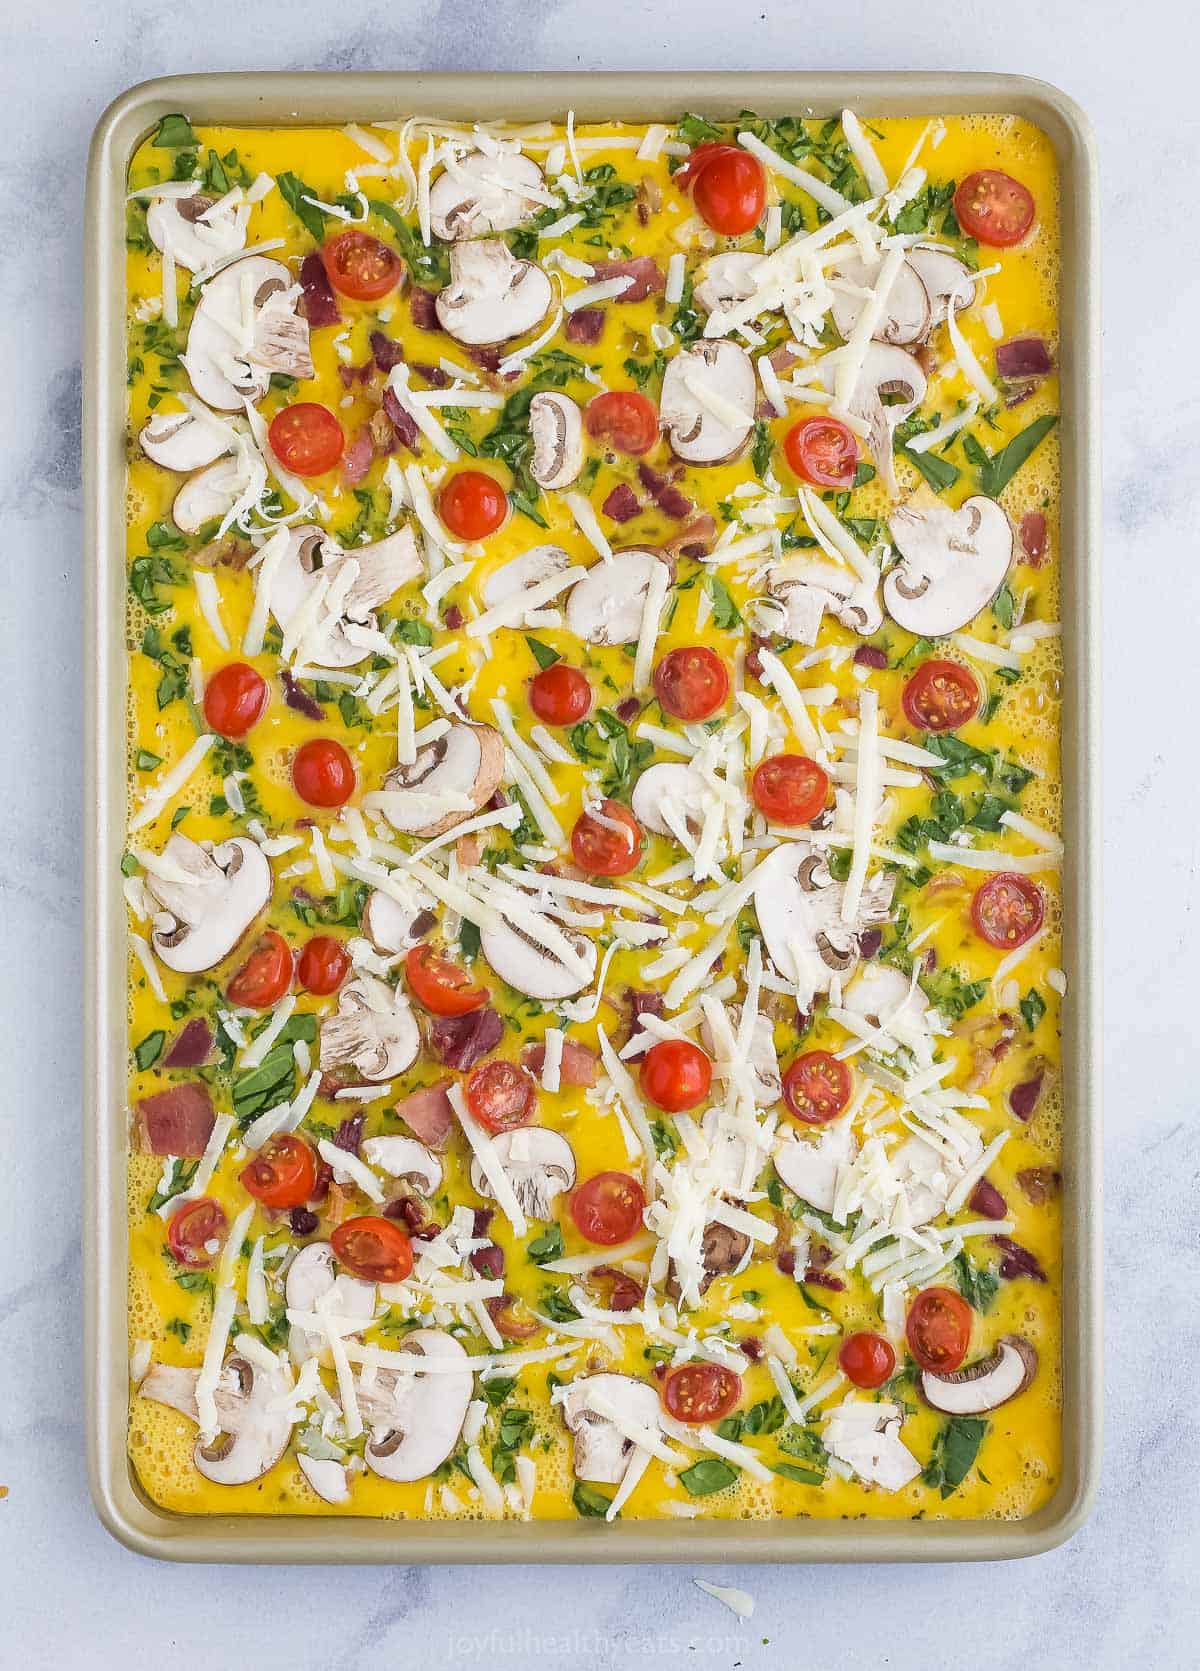 Spinach frittata batter in a baking sheet after all of the toppings have been added